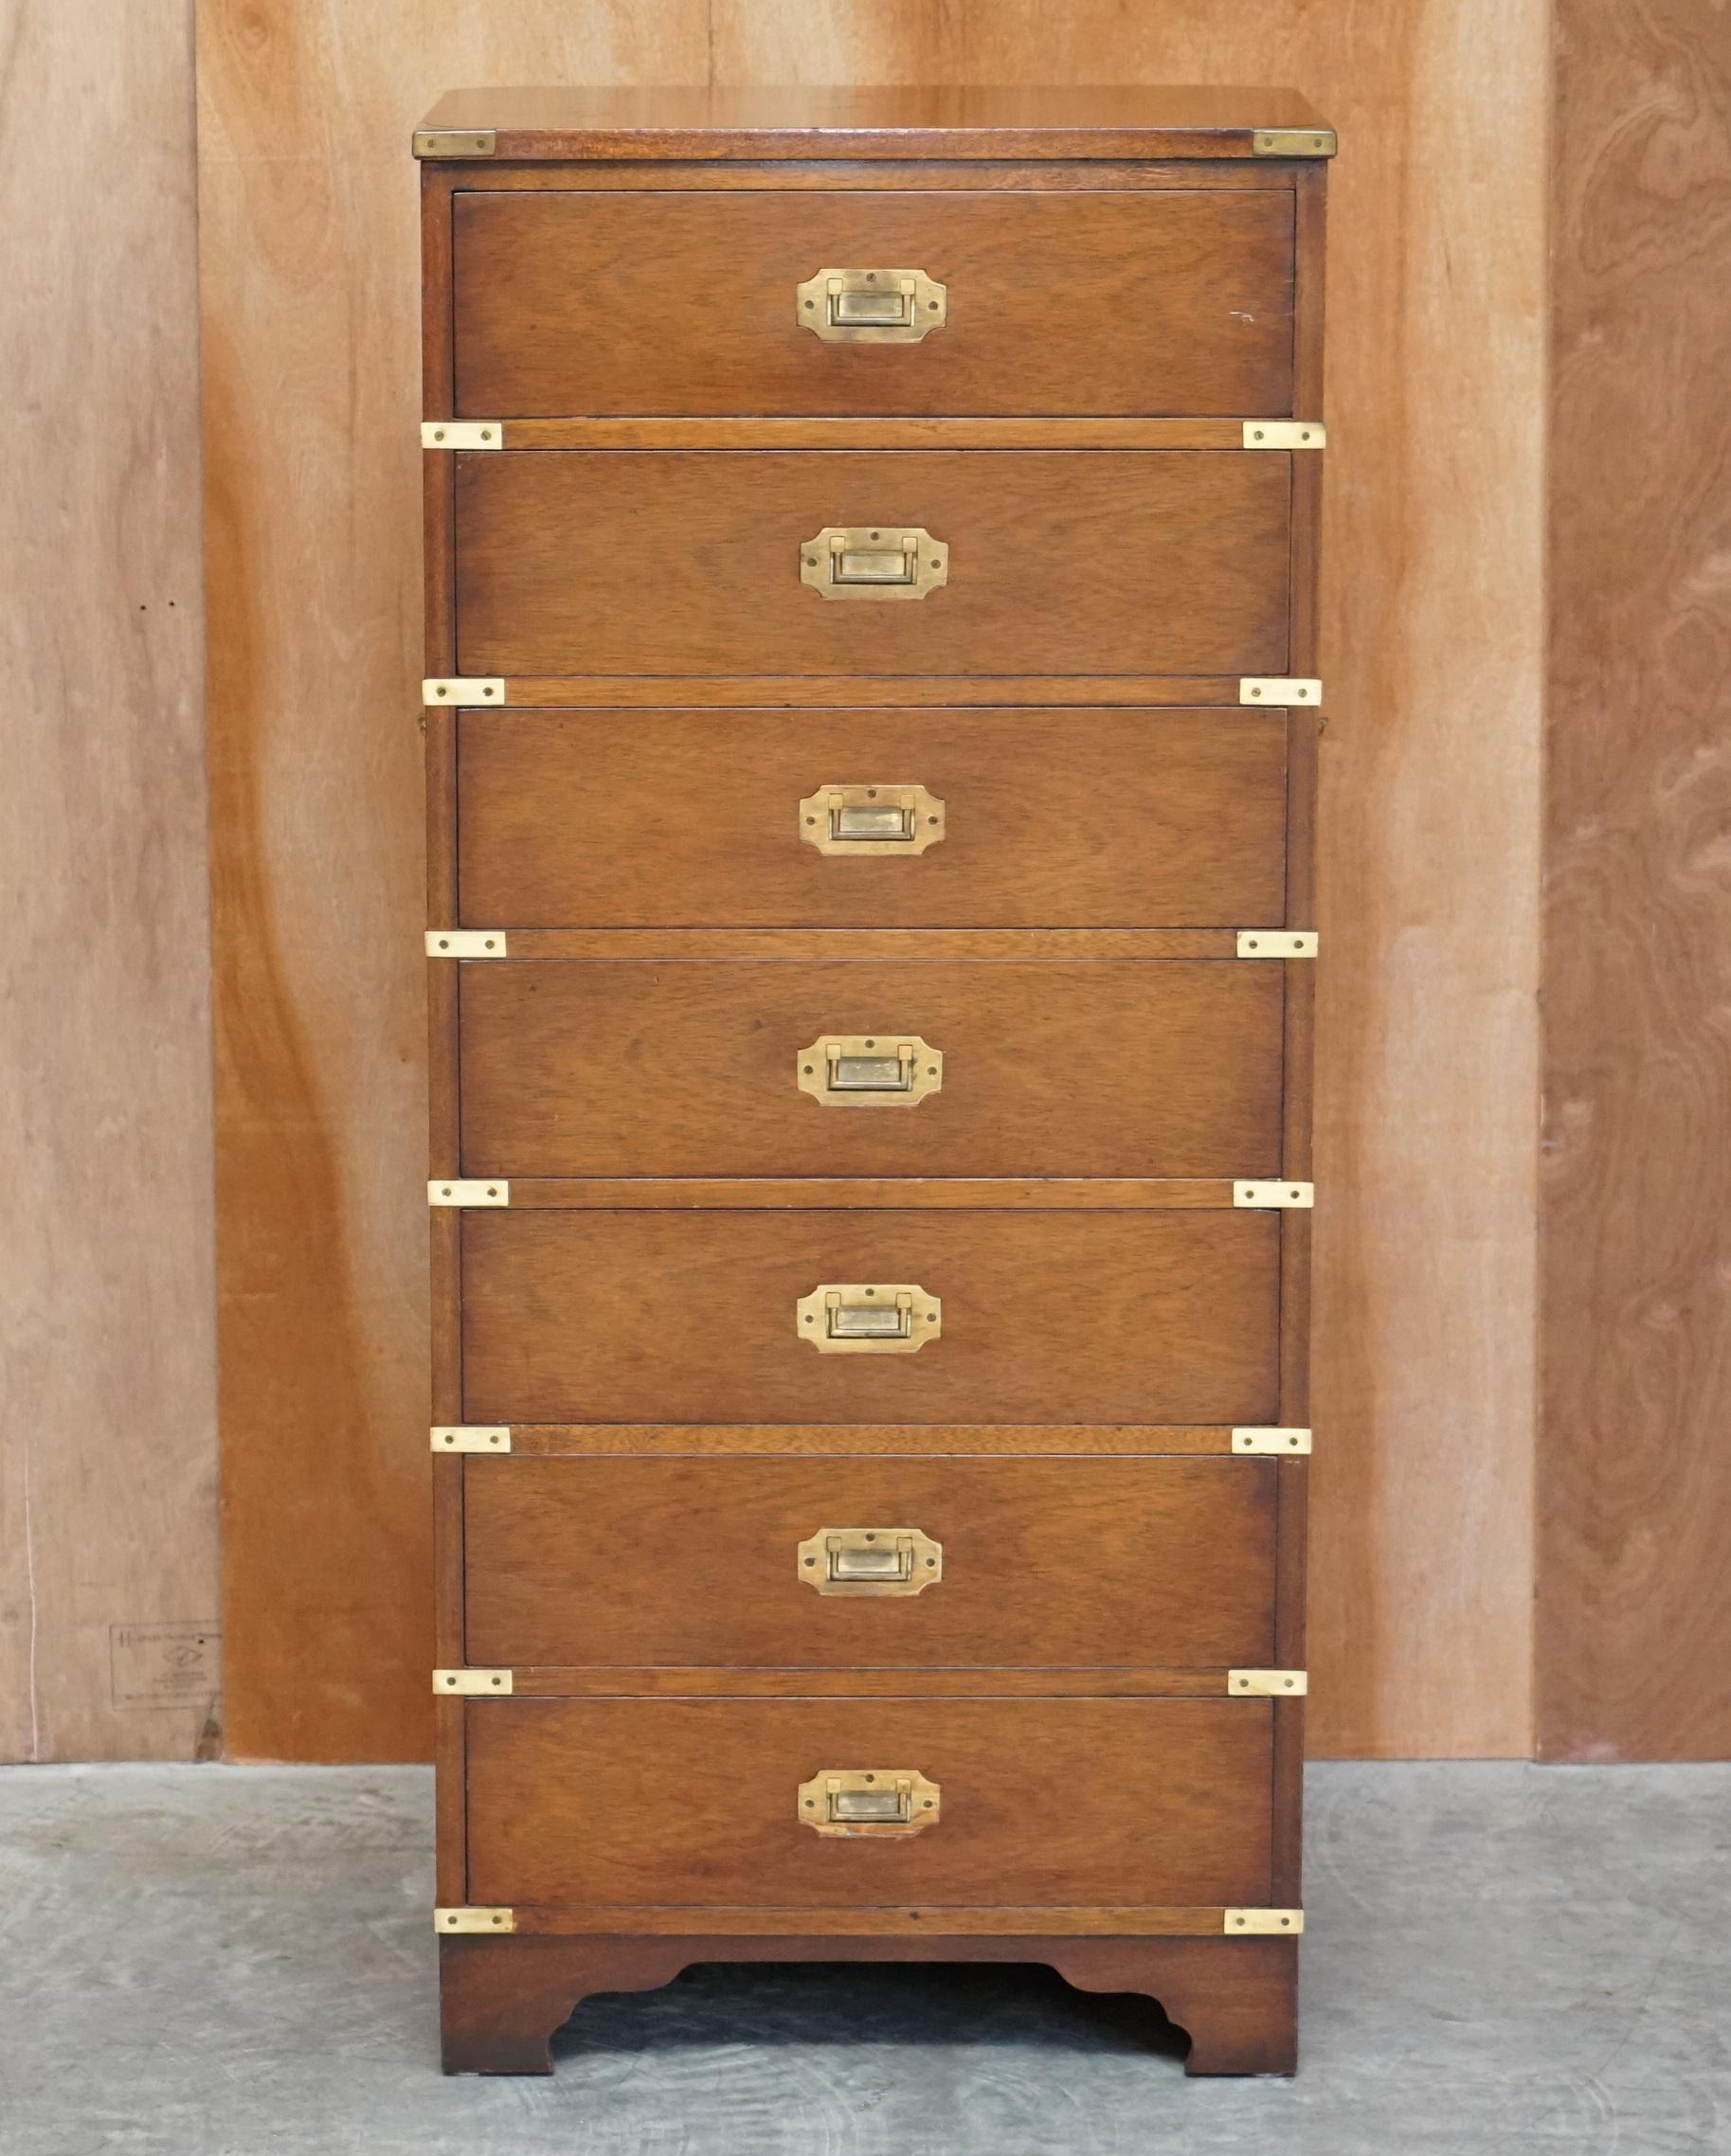 We are delighted to offer for sale this vintage Military Campaign tallboy chest of drawers in light mahogany with brass fixtures and fittings 

A good looking well made and decorative piece, it has some good age to and the timber has a lovely